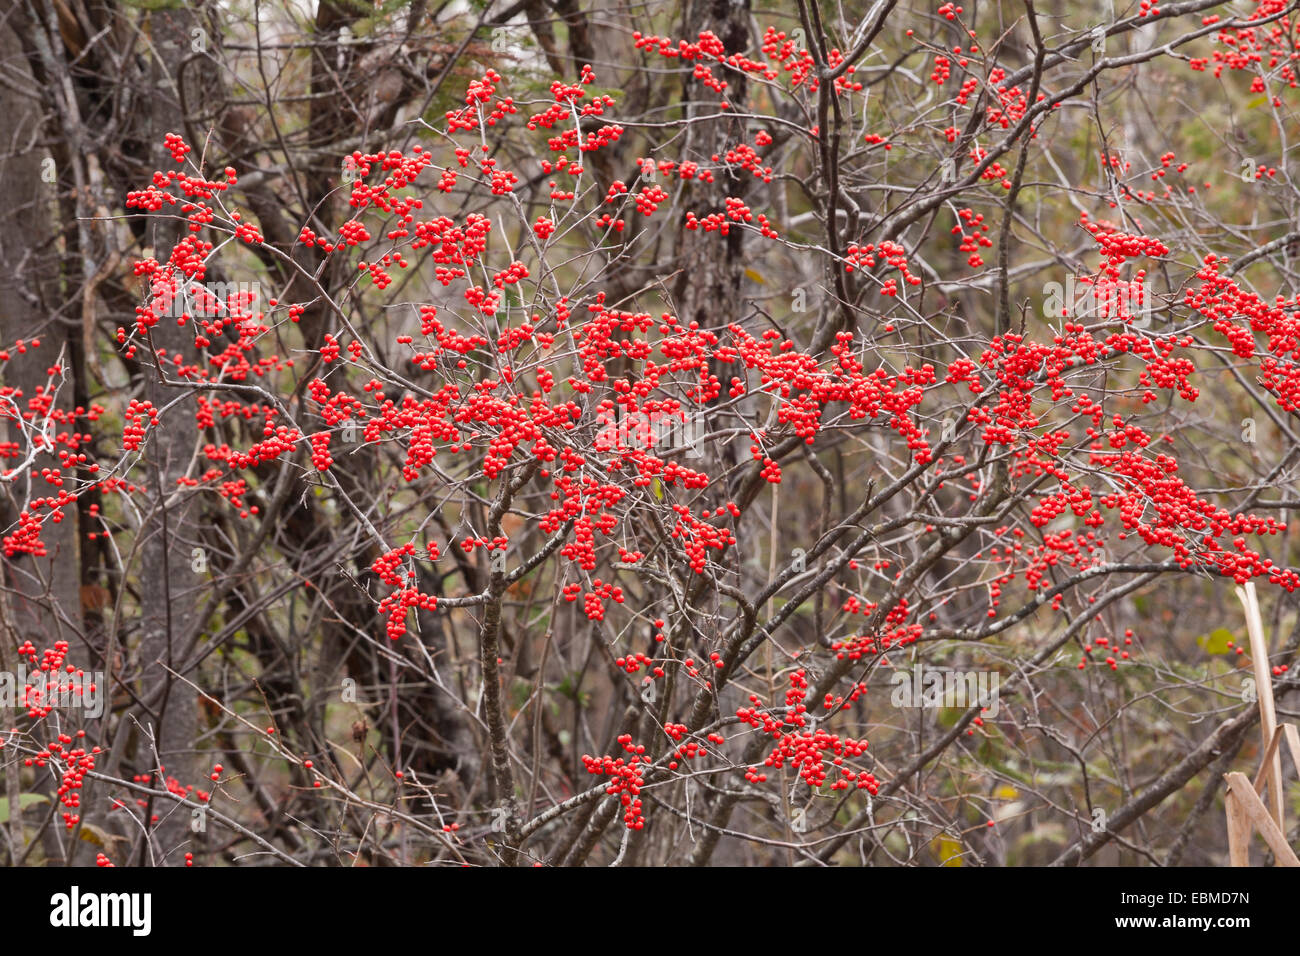 Small Red Berries Hang From An Otherwise Bare Tree In Late Autumn